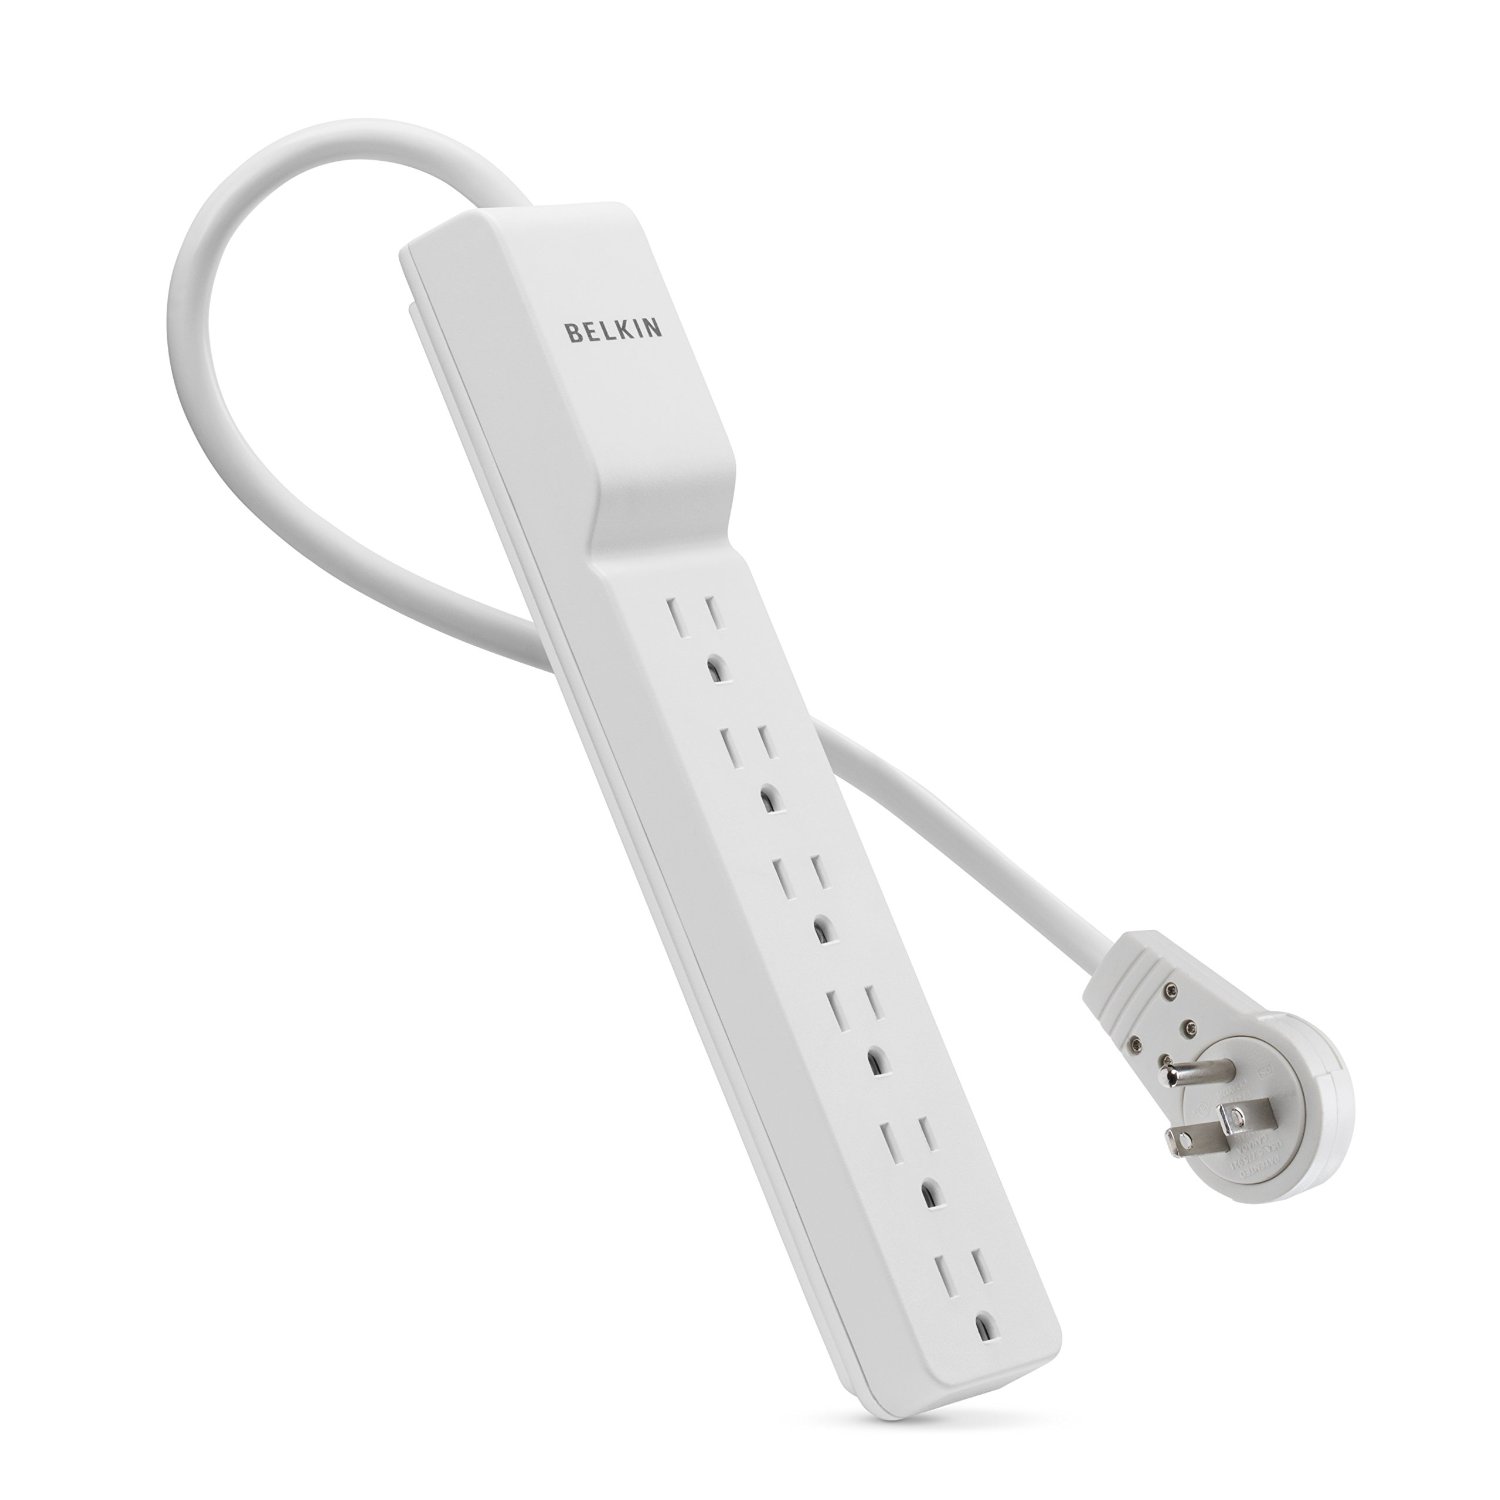 Belkin 6-Outlet Commercial Power Strip Surge Protector with 8-Foot Power Cord and Rotating Plug, 720 Joules (BE106000-08R)